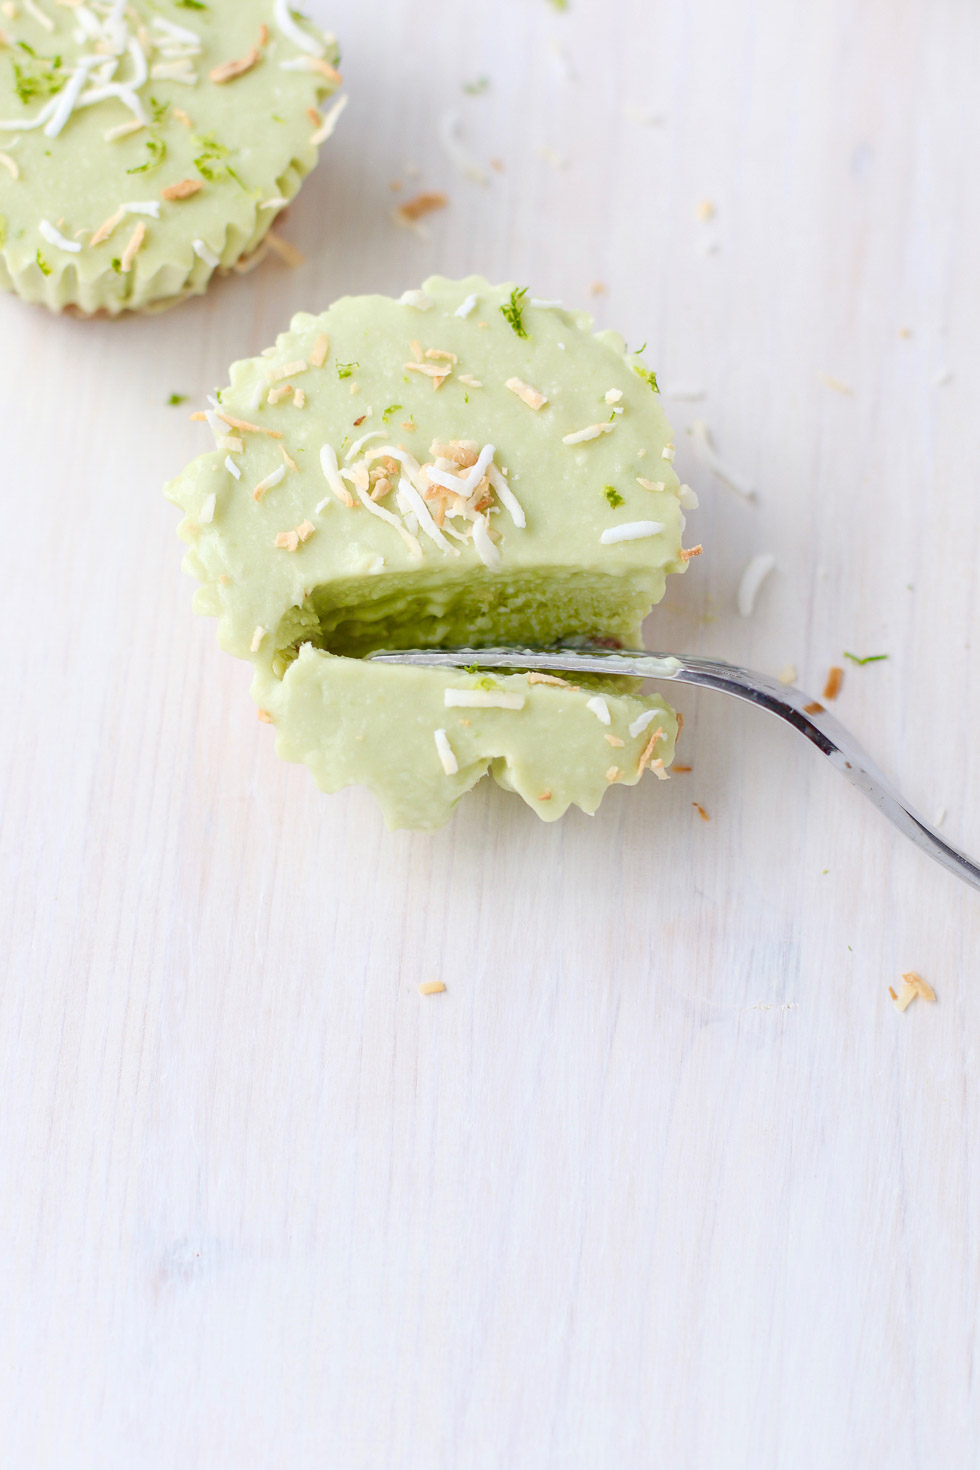 Coconut Avocado Lime Tartlets with a fork through one to show the inside.